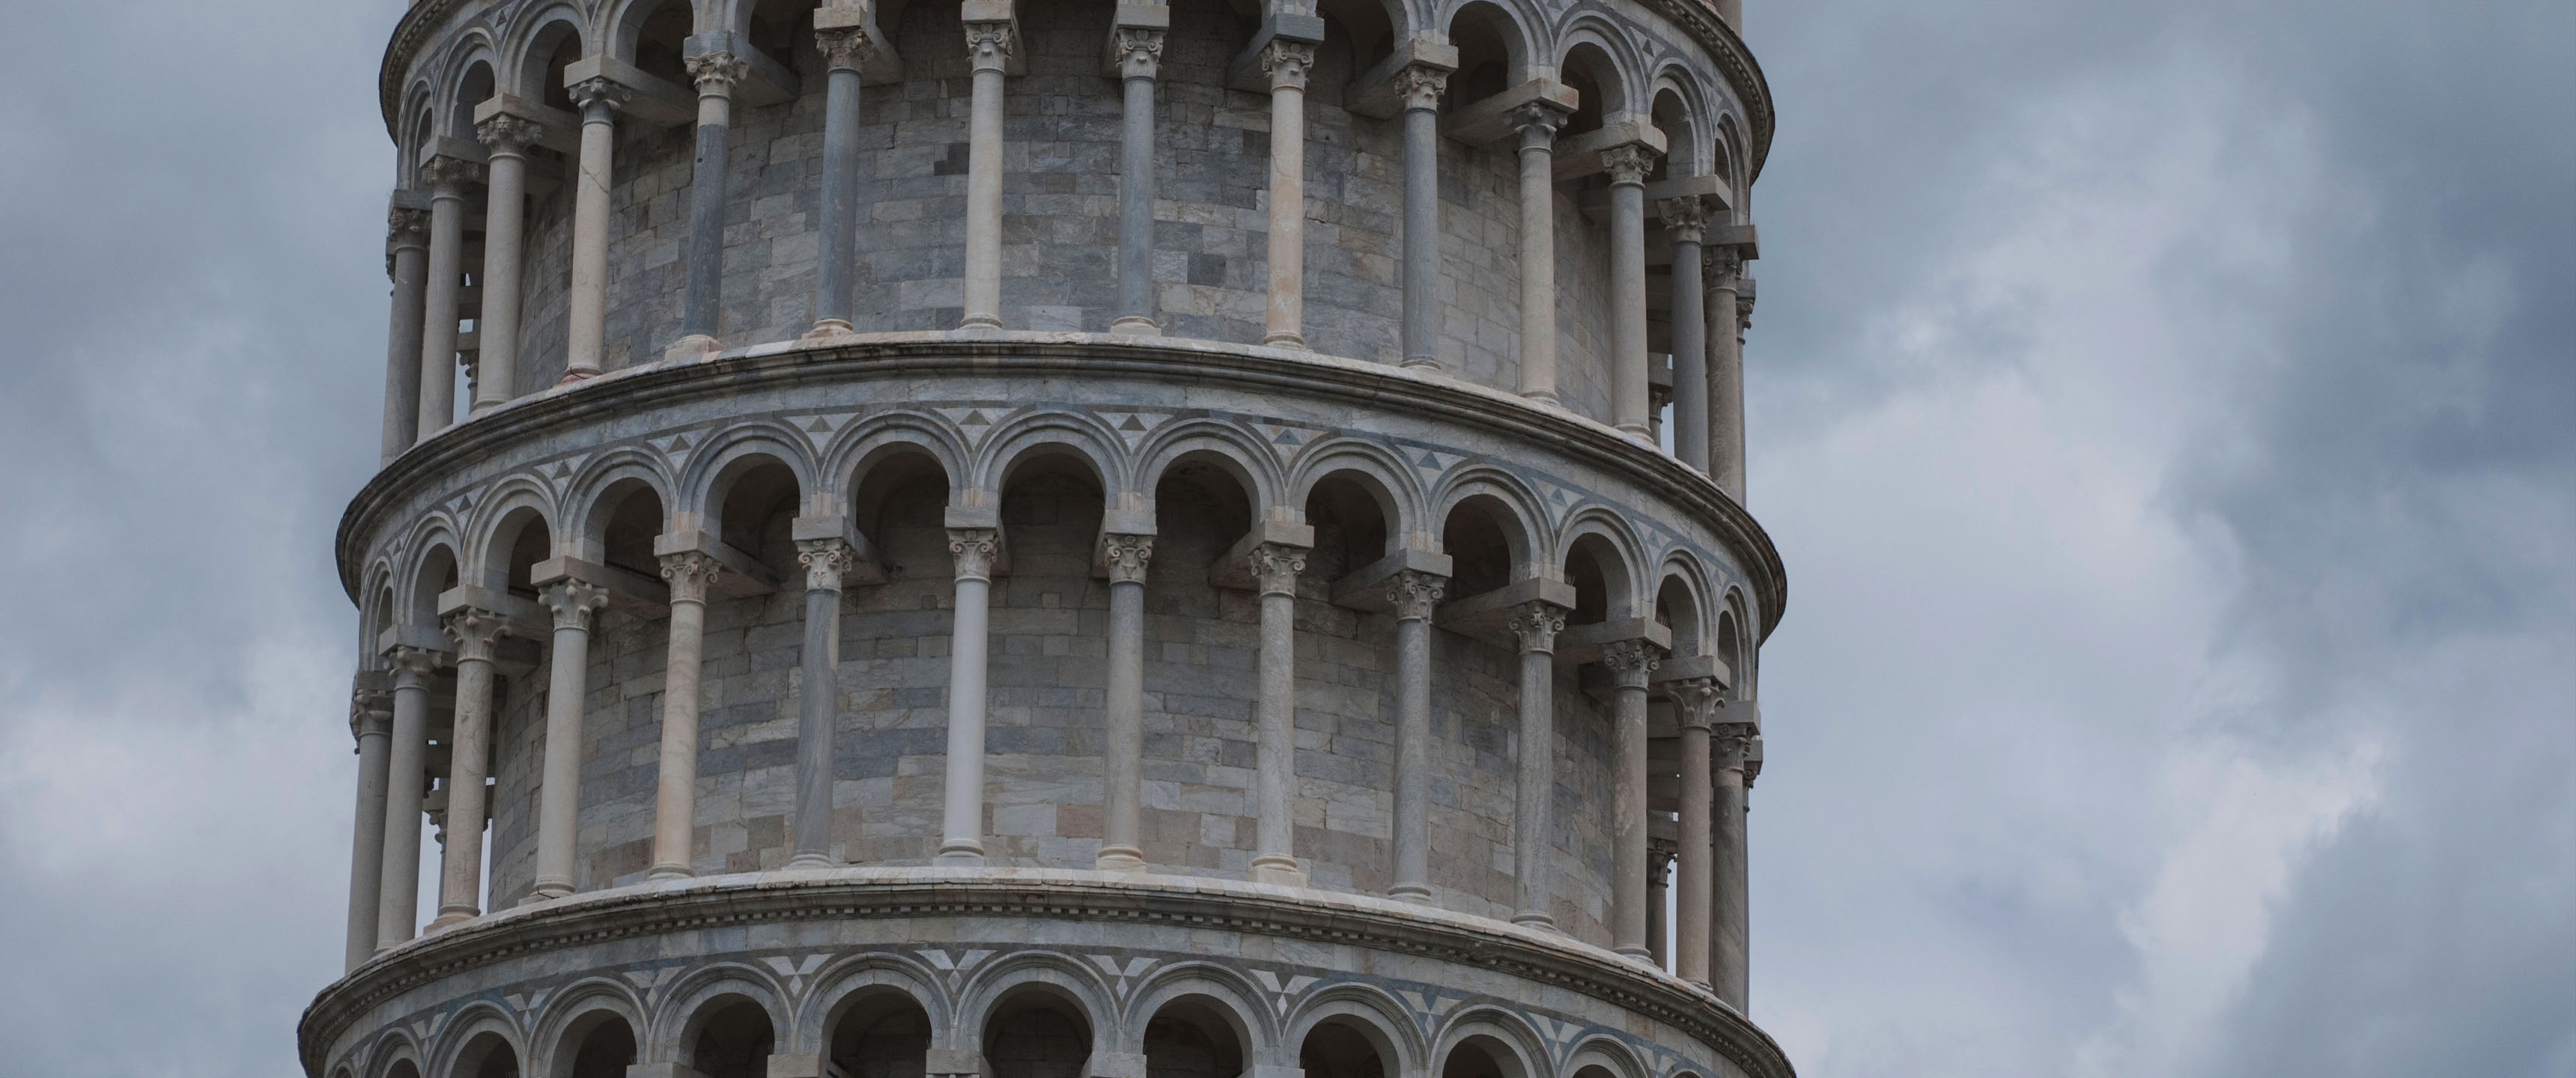 General 3440x1440 Leaning Tower of Pisa architecture Italy building Europe landmark World Heritage Site ultrawide